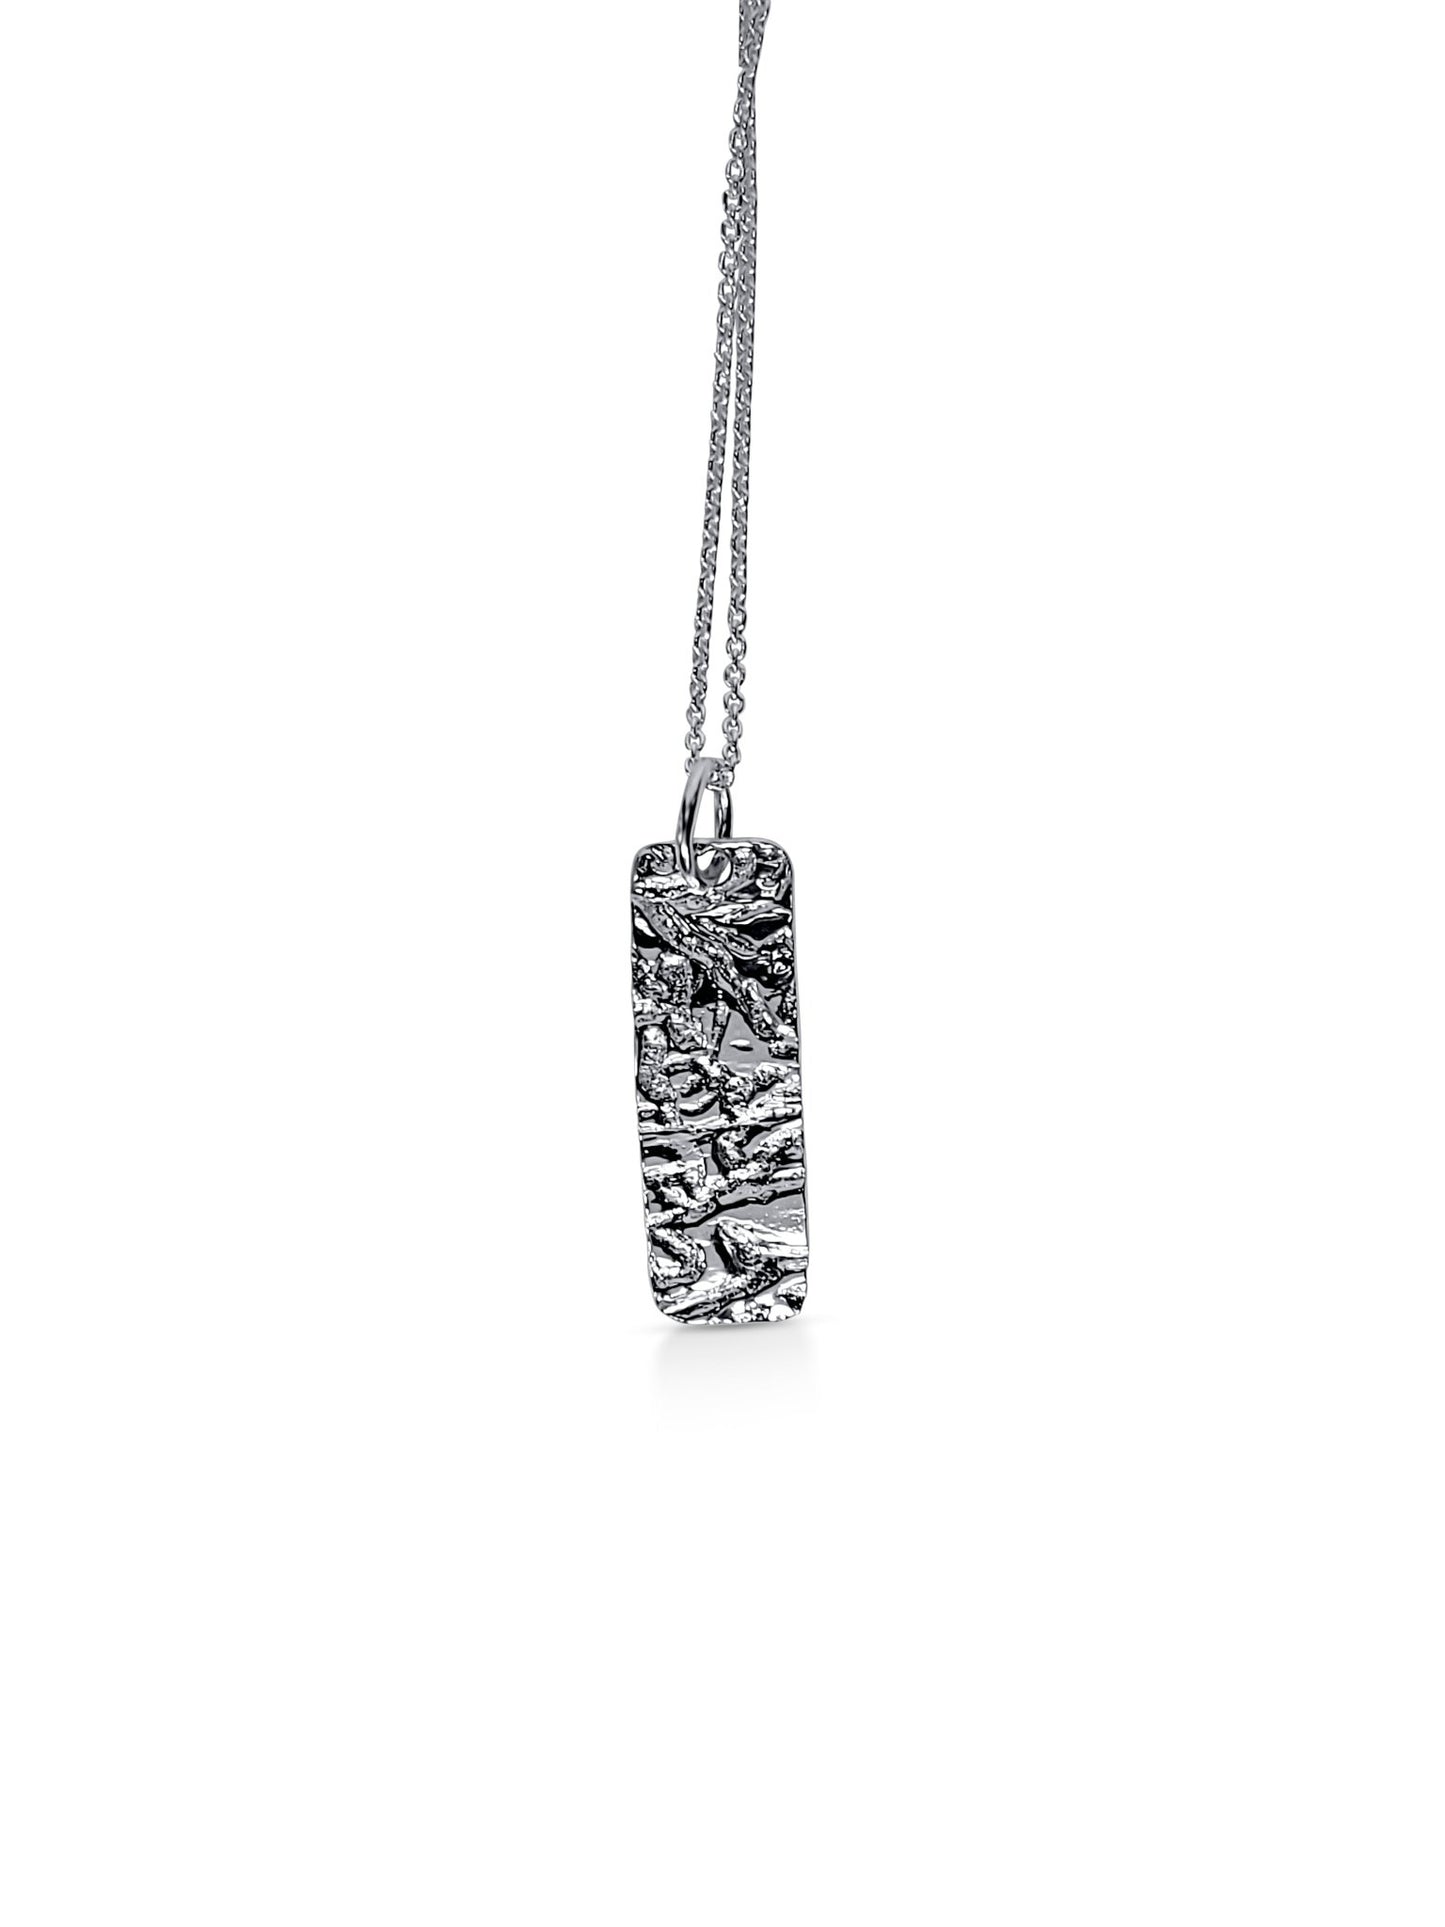 driftwood natural texture minimalist sterling silver rectangle pendant necklace on matching silver chain necklace